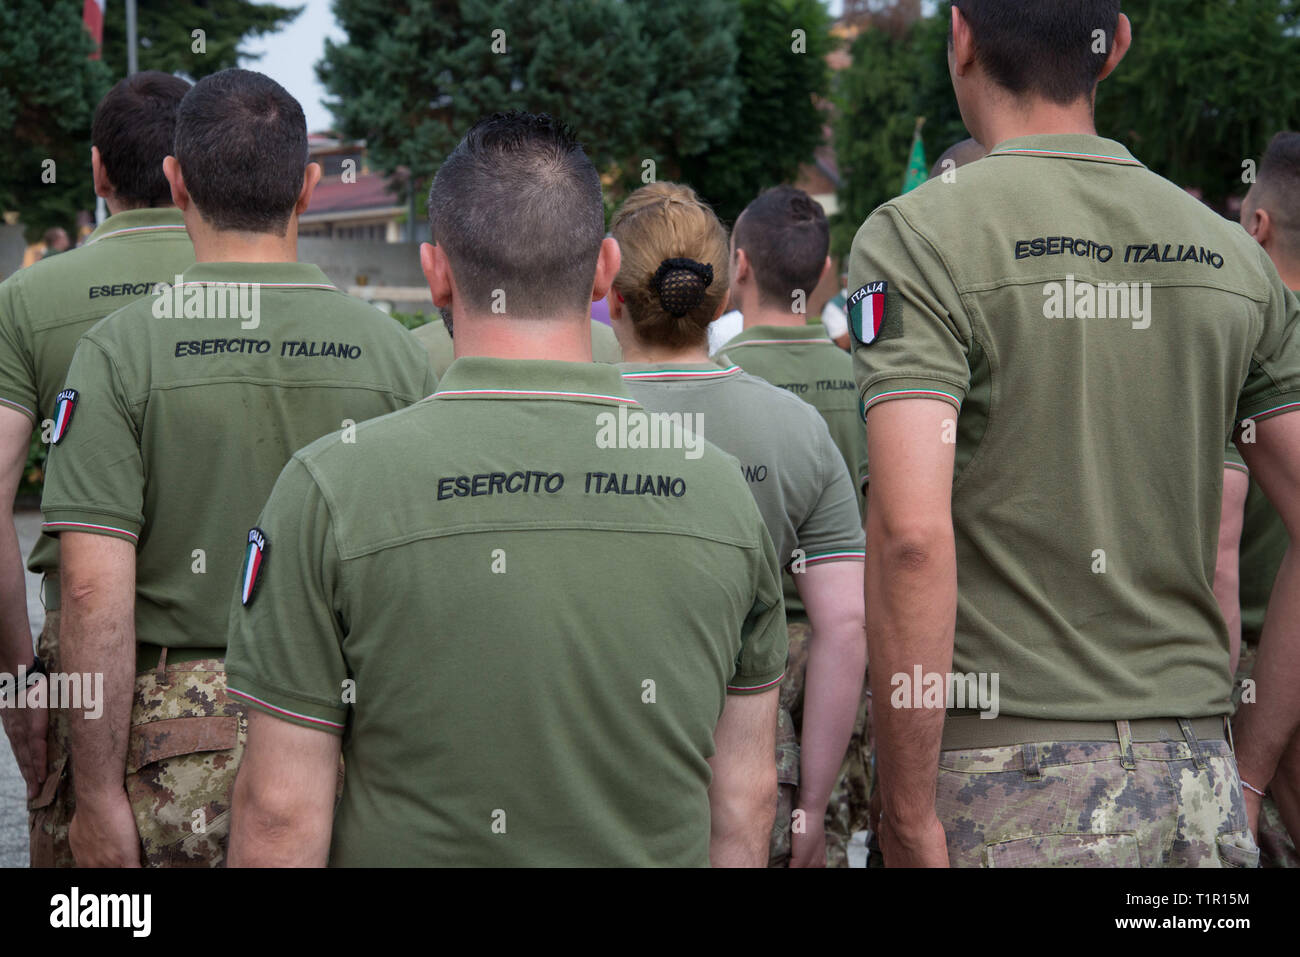 Torino, torino, Italy. 27th Mar, 2019. Italian army engaged in training.  Credit: Puletto Diego/SOPA Images/ZUMA Wire/Alamy Live News Stock Photo -  Alamy